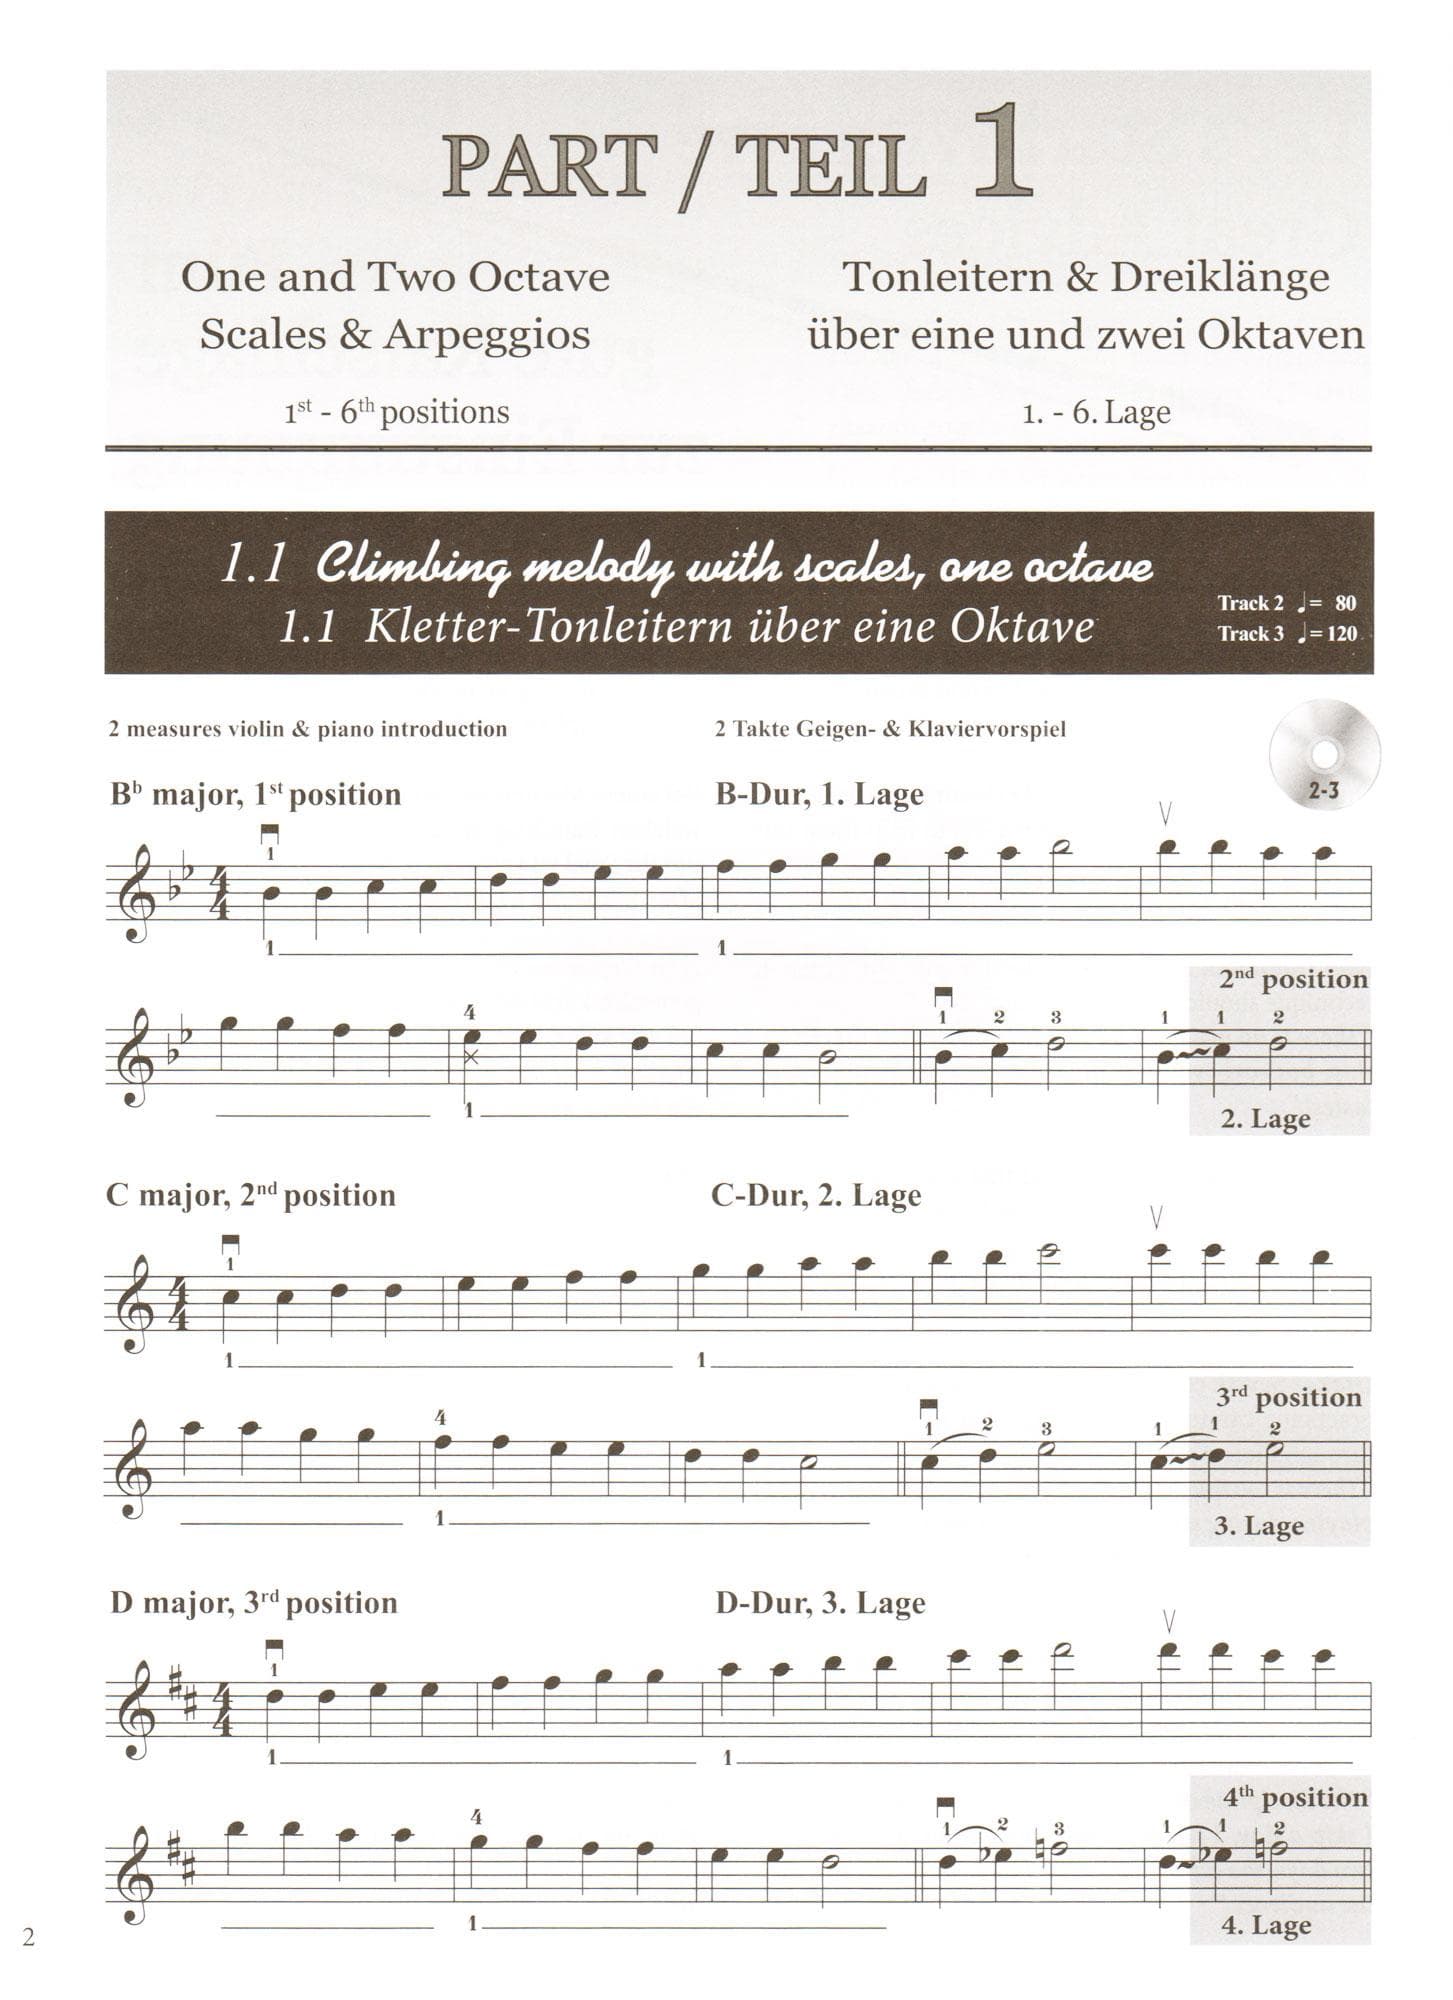 Enjoying Violin Technique - Basic Exercises with Piano Arrangements and CD/Online Audio - for Intermediate Violin - by Kerstin Wartberg - Istex Music Publications